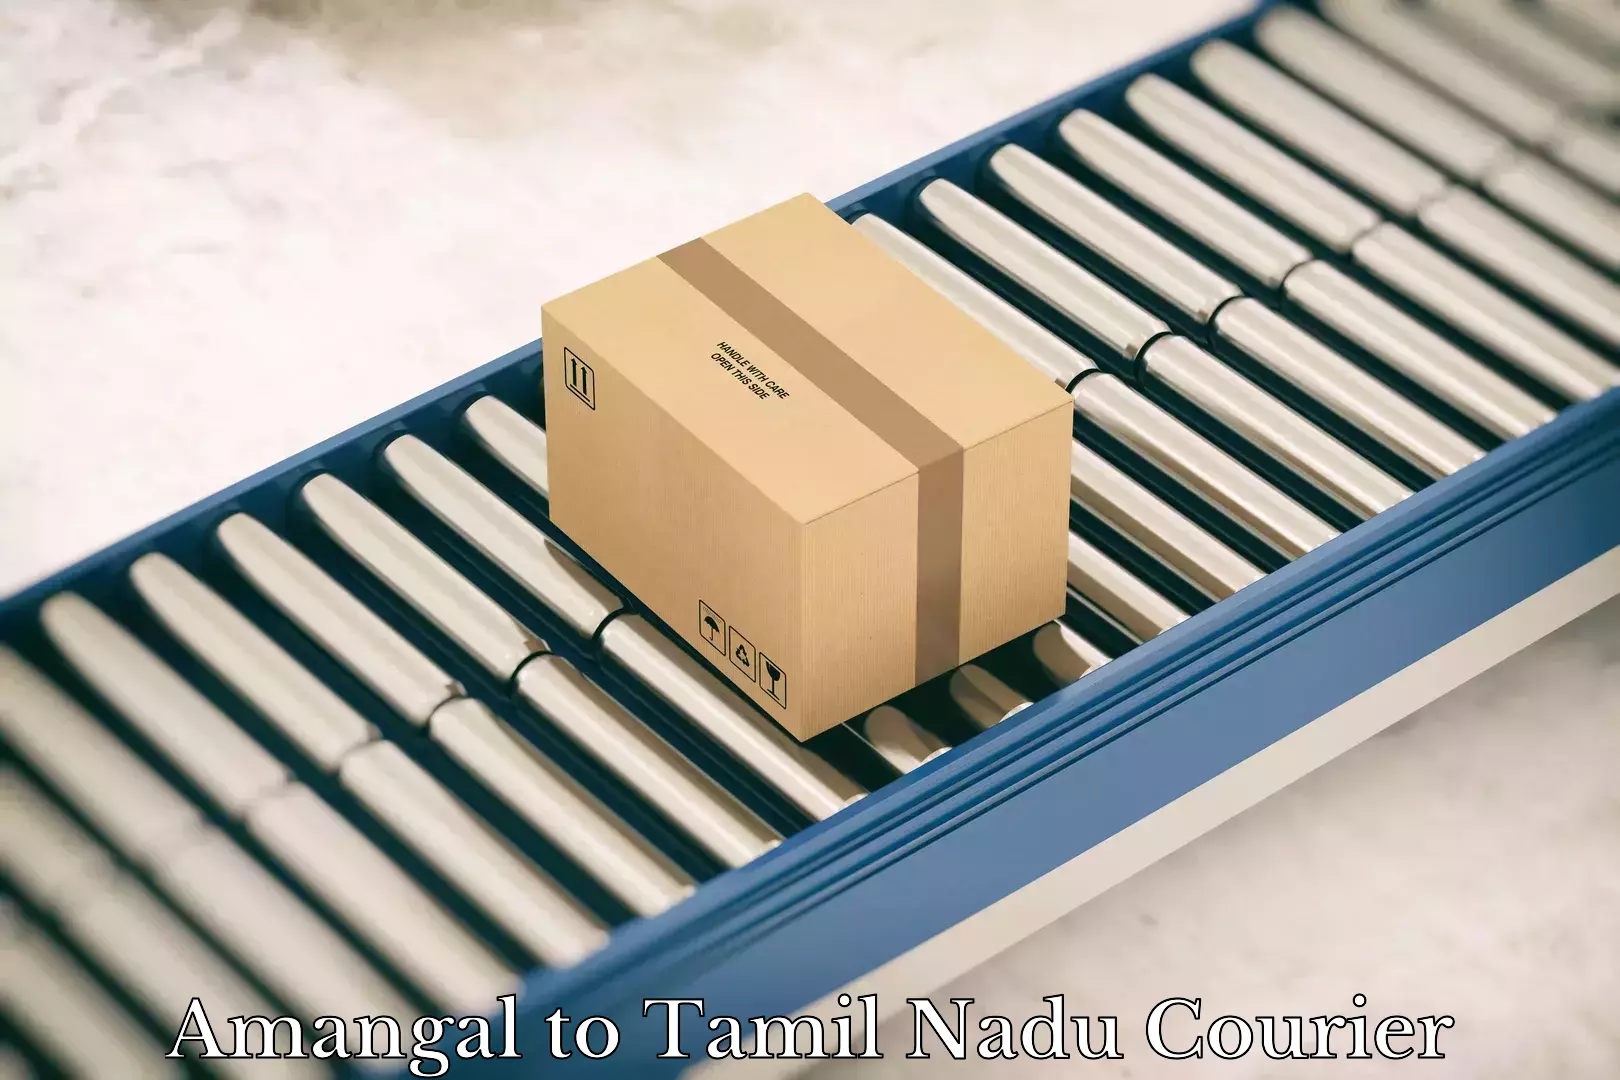 Courier service booking Amangal to Tamil Nadu